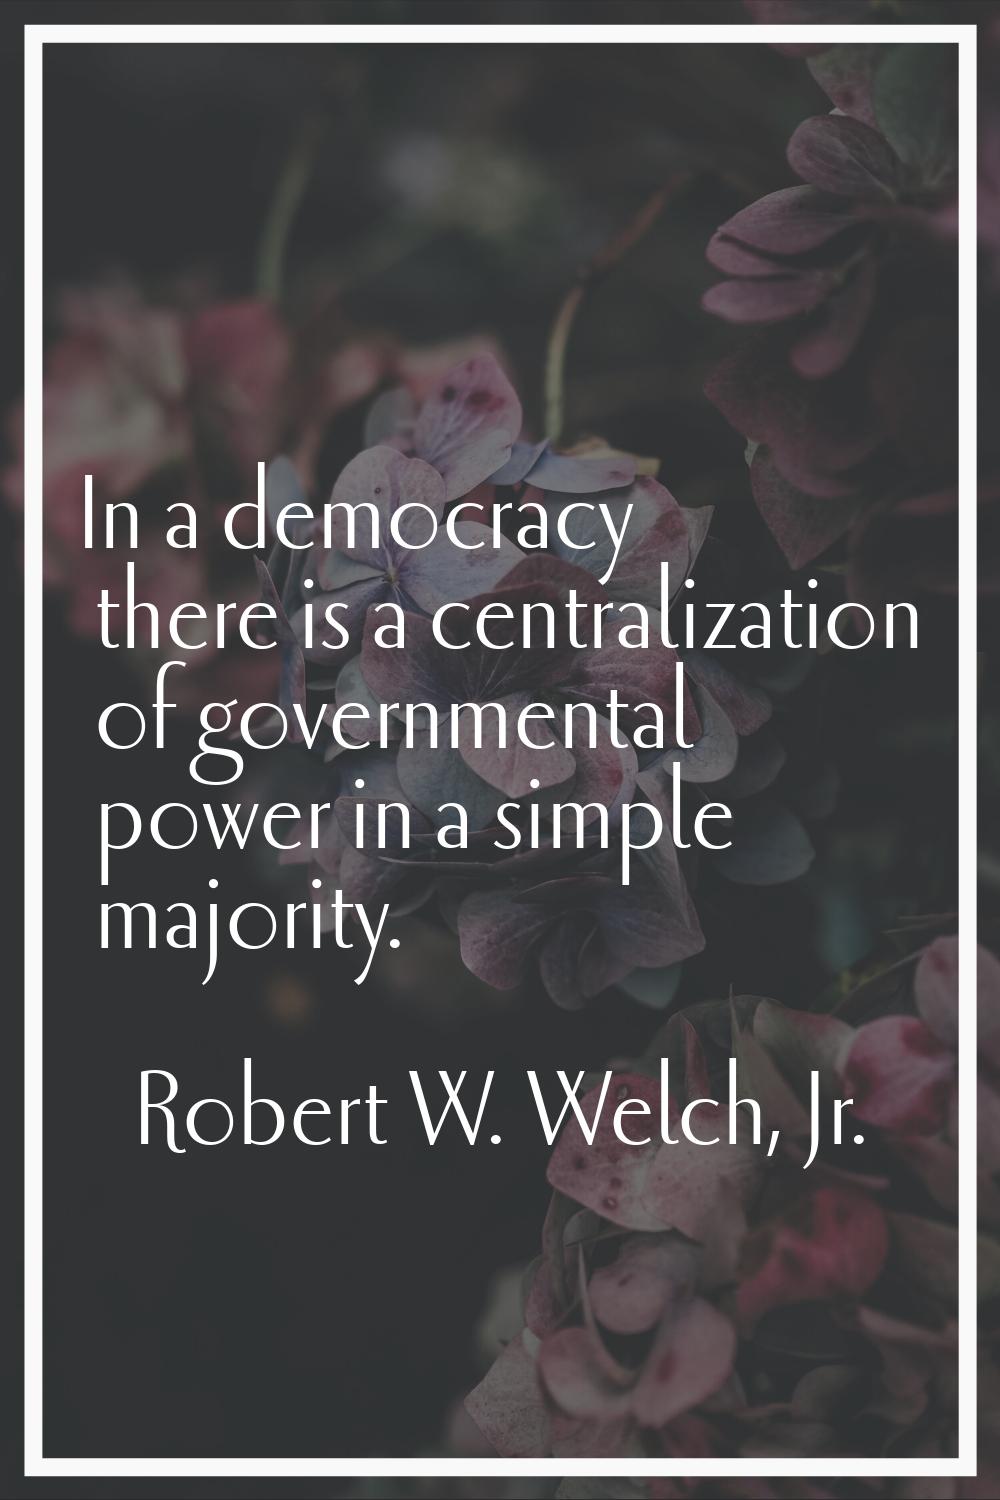 In a democracy there is a centralization of governmental power in a simple majority.